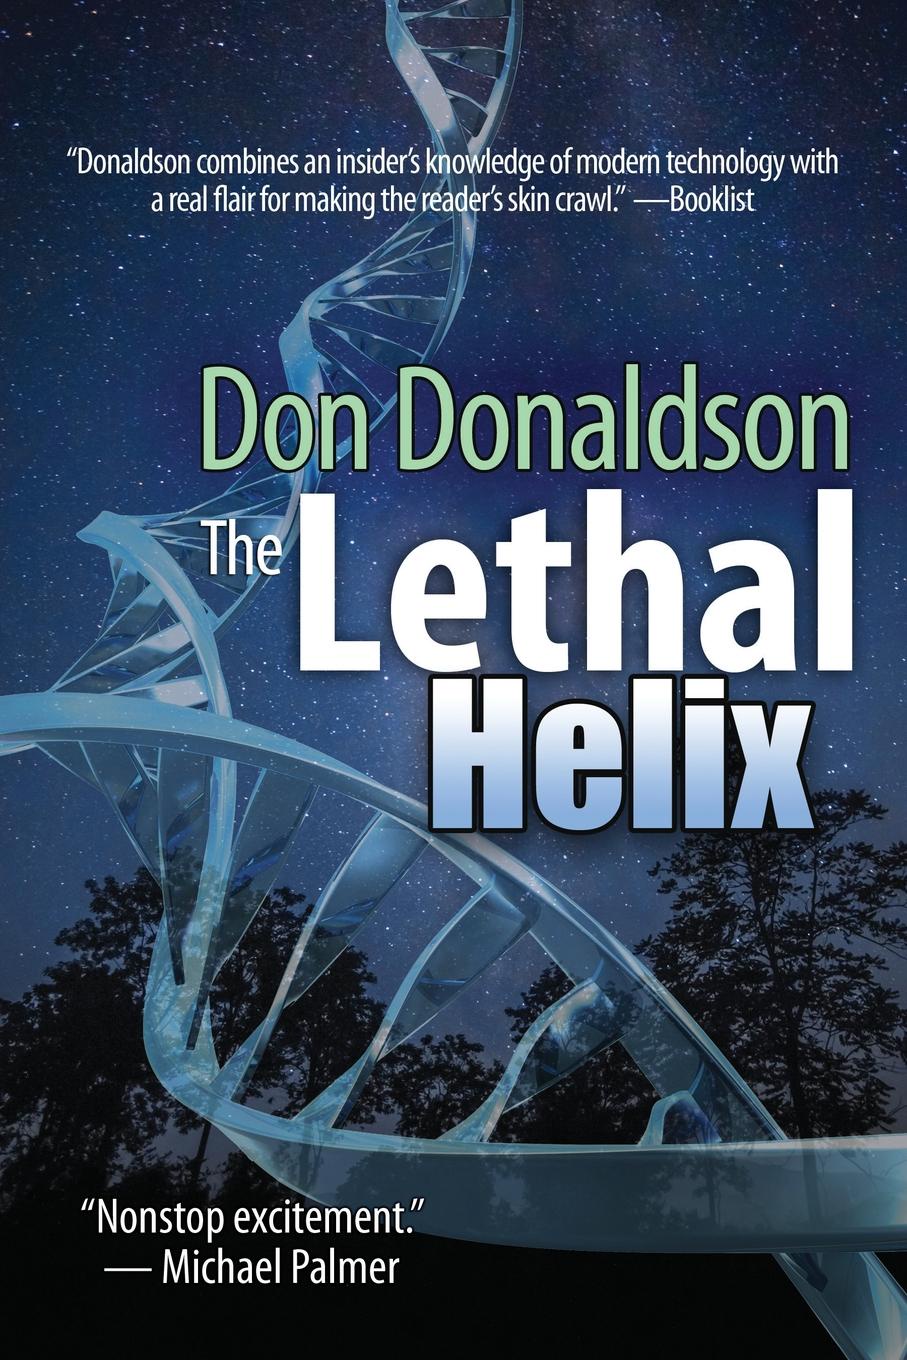 The Lethal Helix